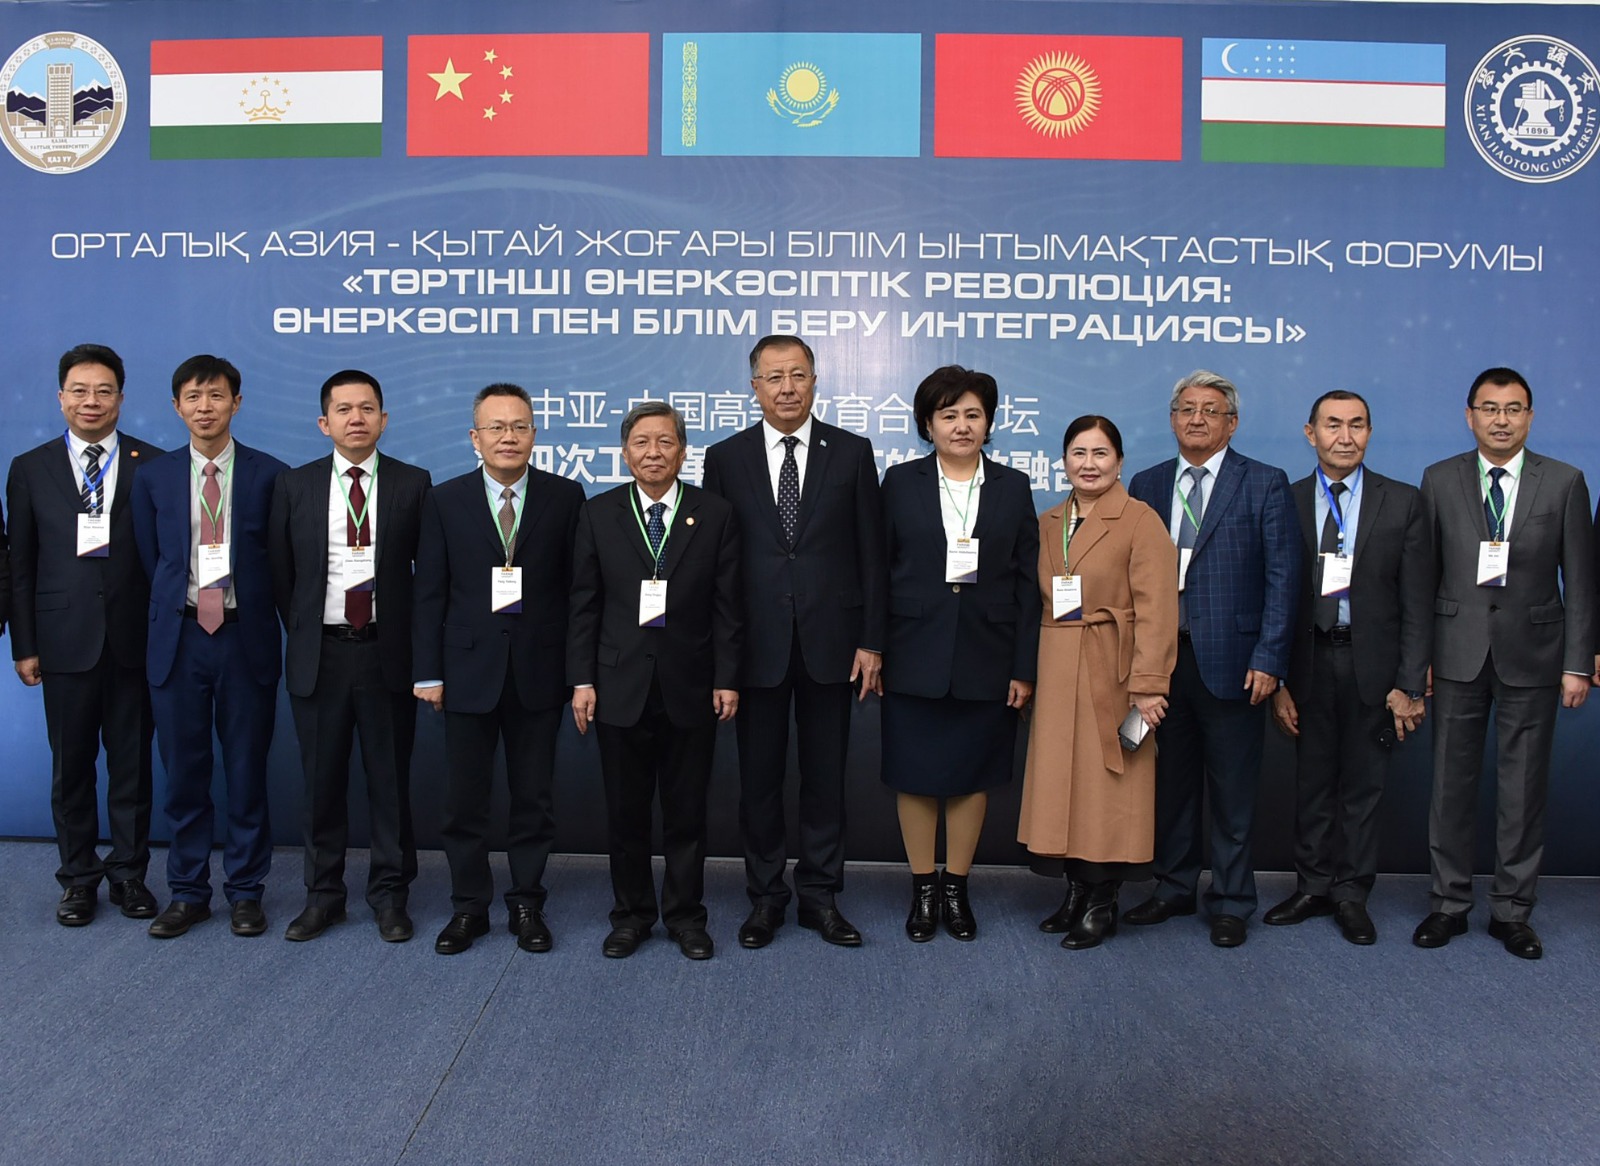 Forum of universities of China and Central Asian countries was held in KazNU